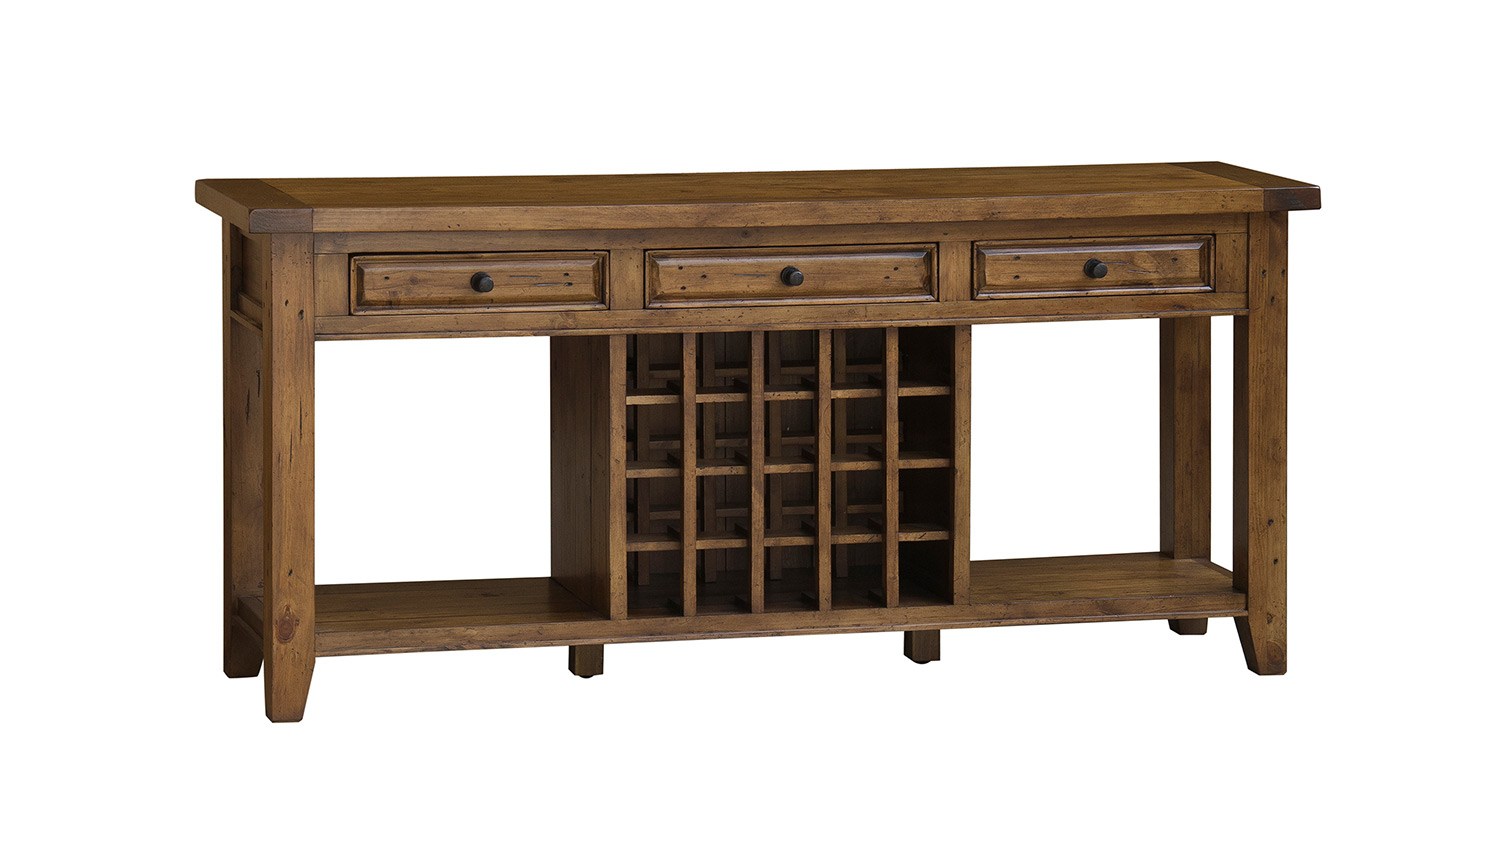 Hillsdale Tuscan Retreat Sideboard with 20 Bottle Wine Storage - Antique Pine